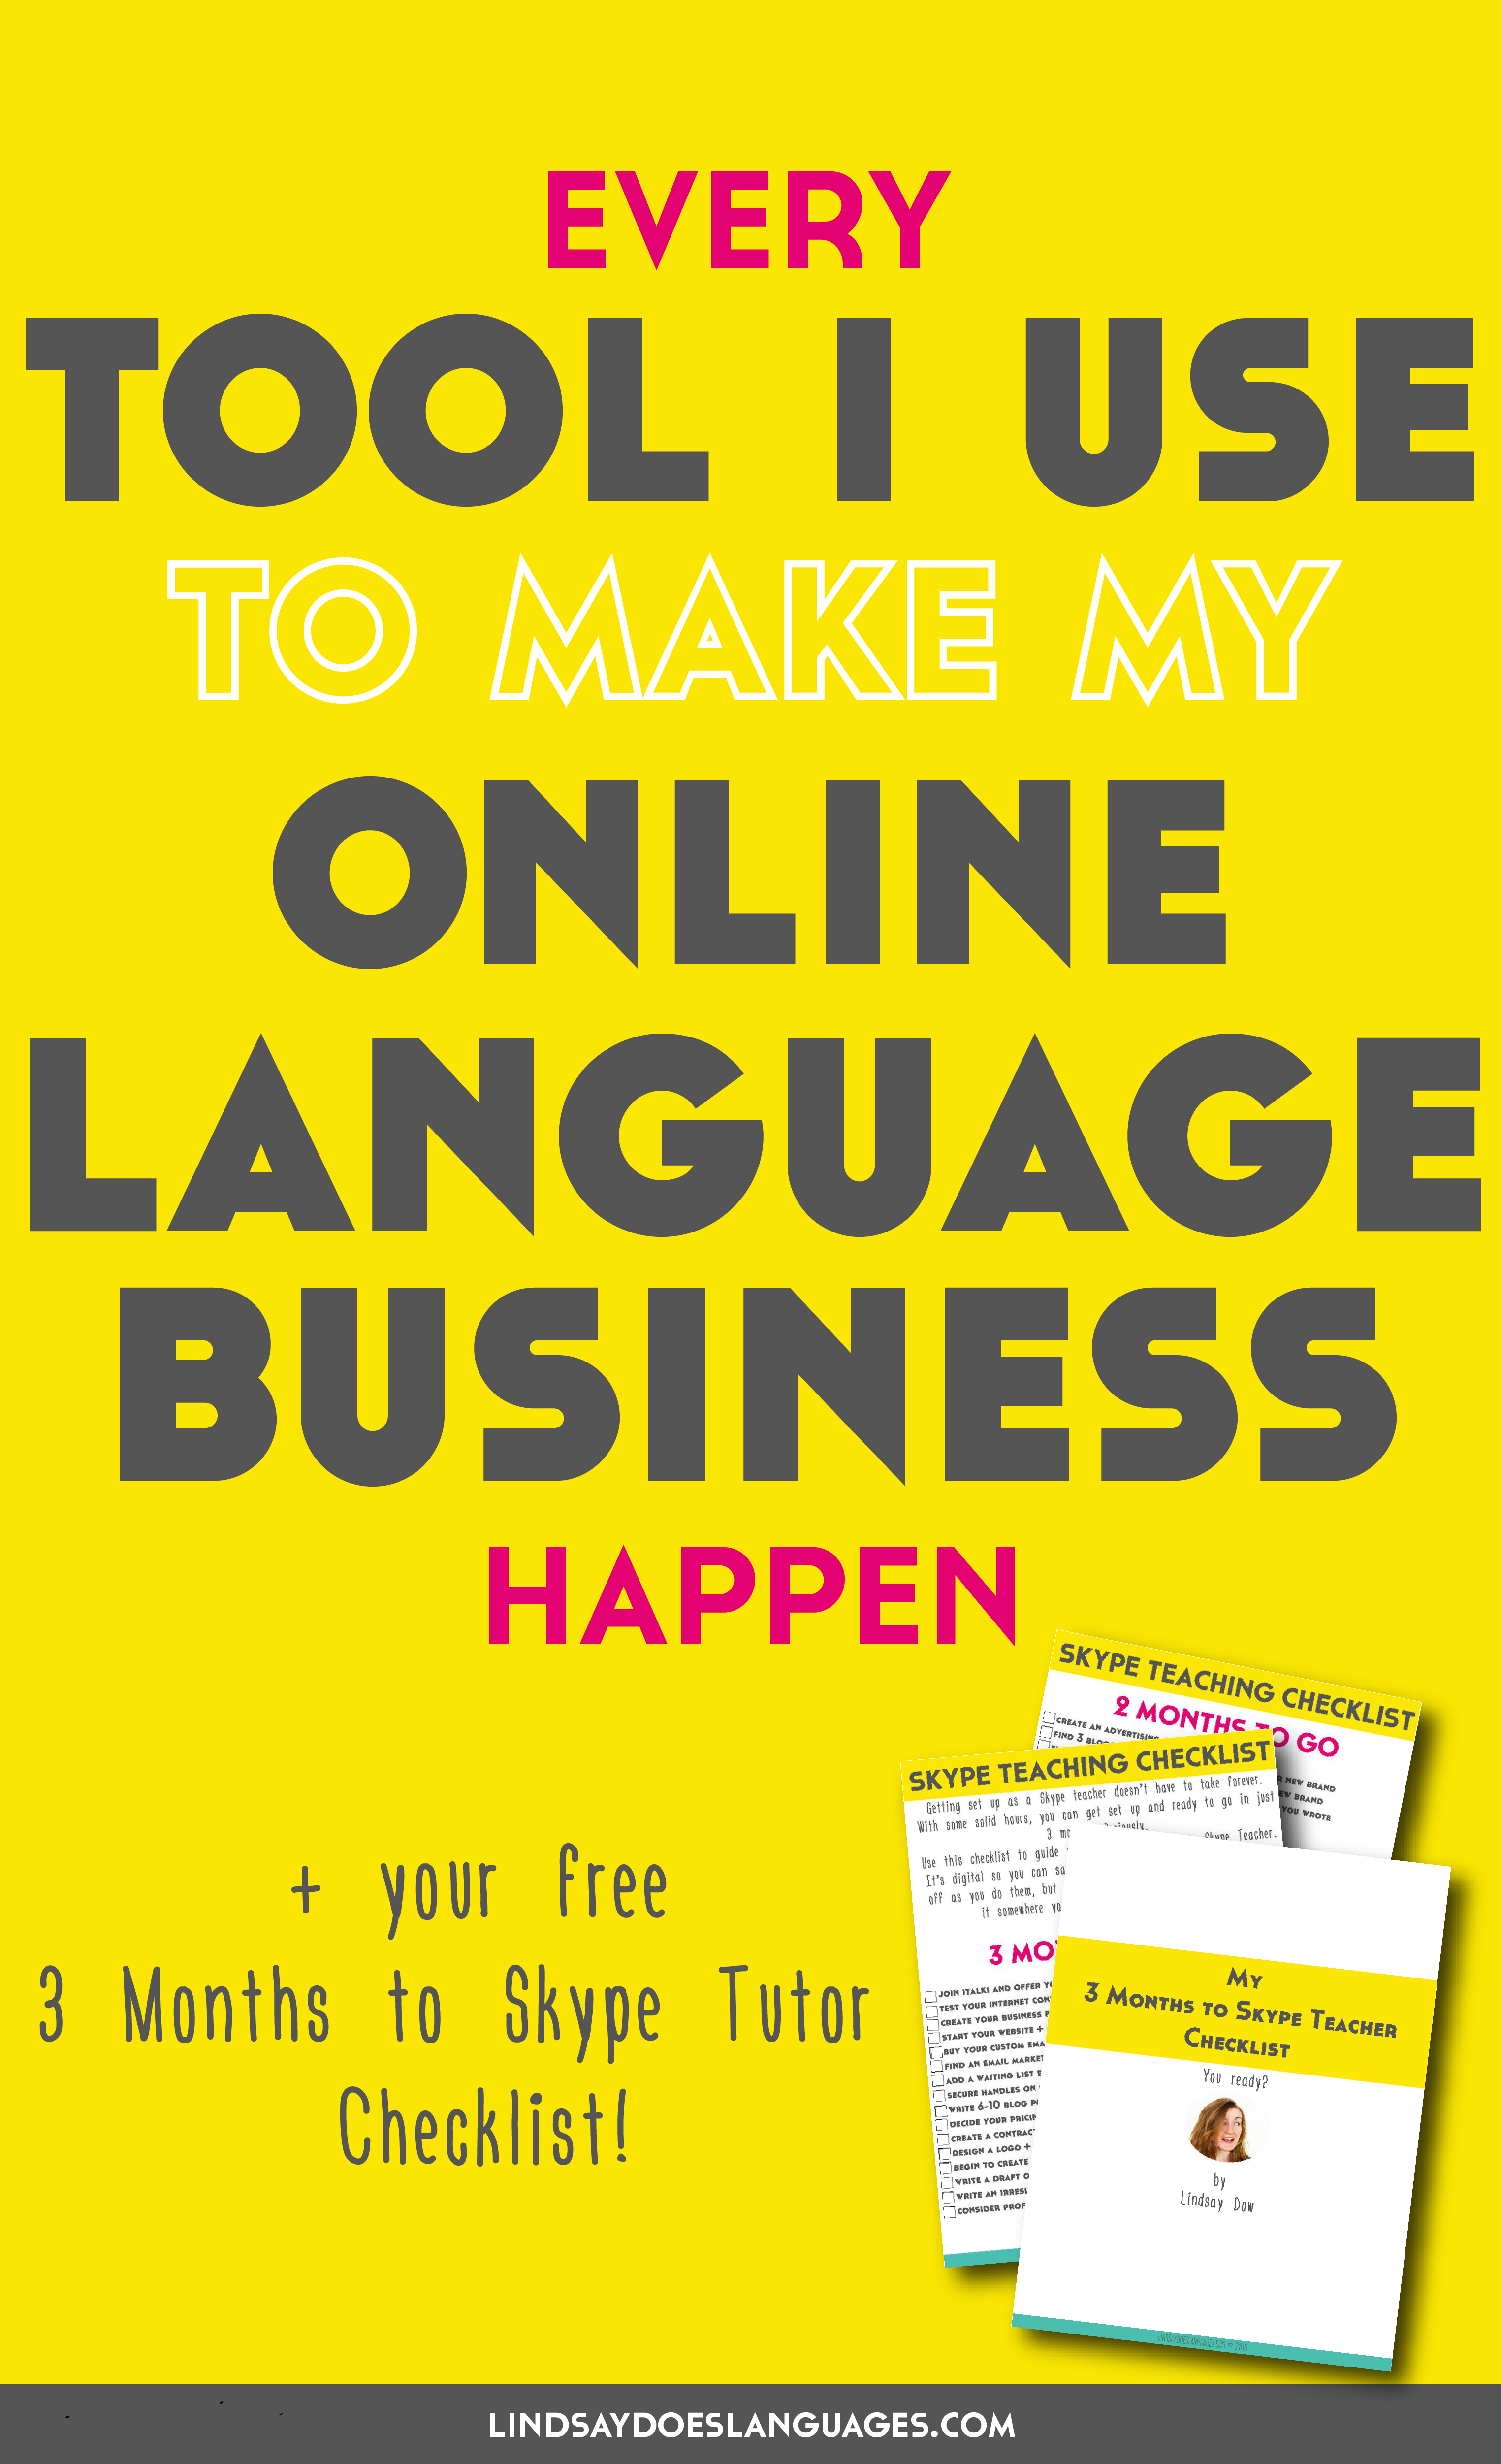 Do you want to run your own online language business? Click through to read about everything I use to make my business happen + get your free guide. >>